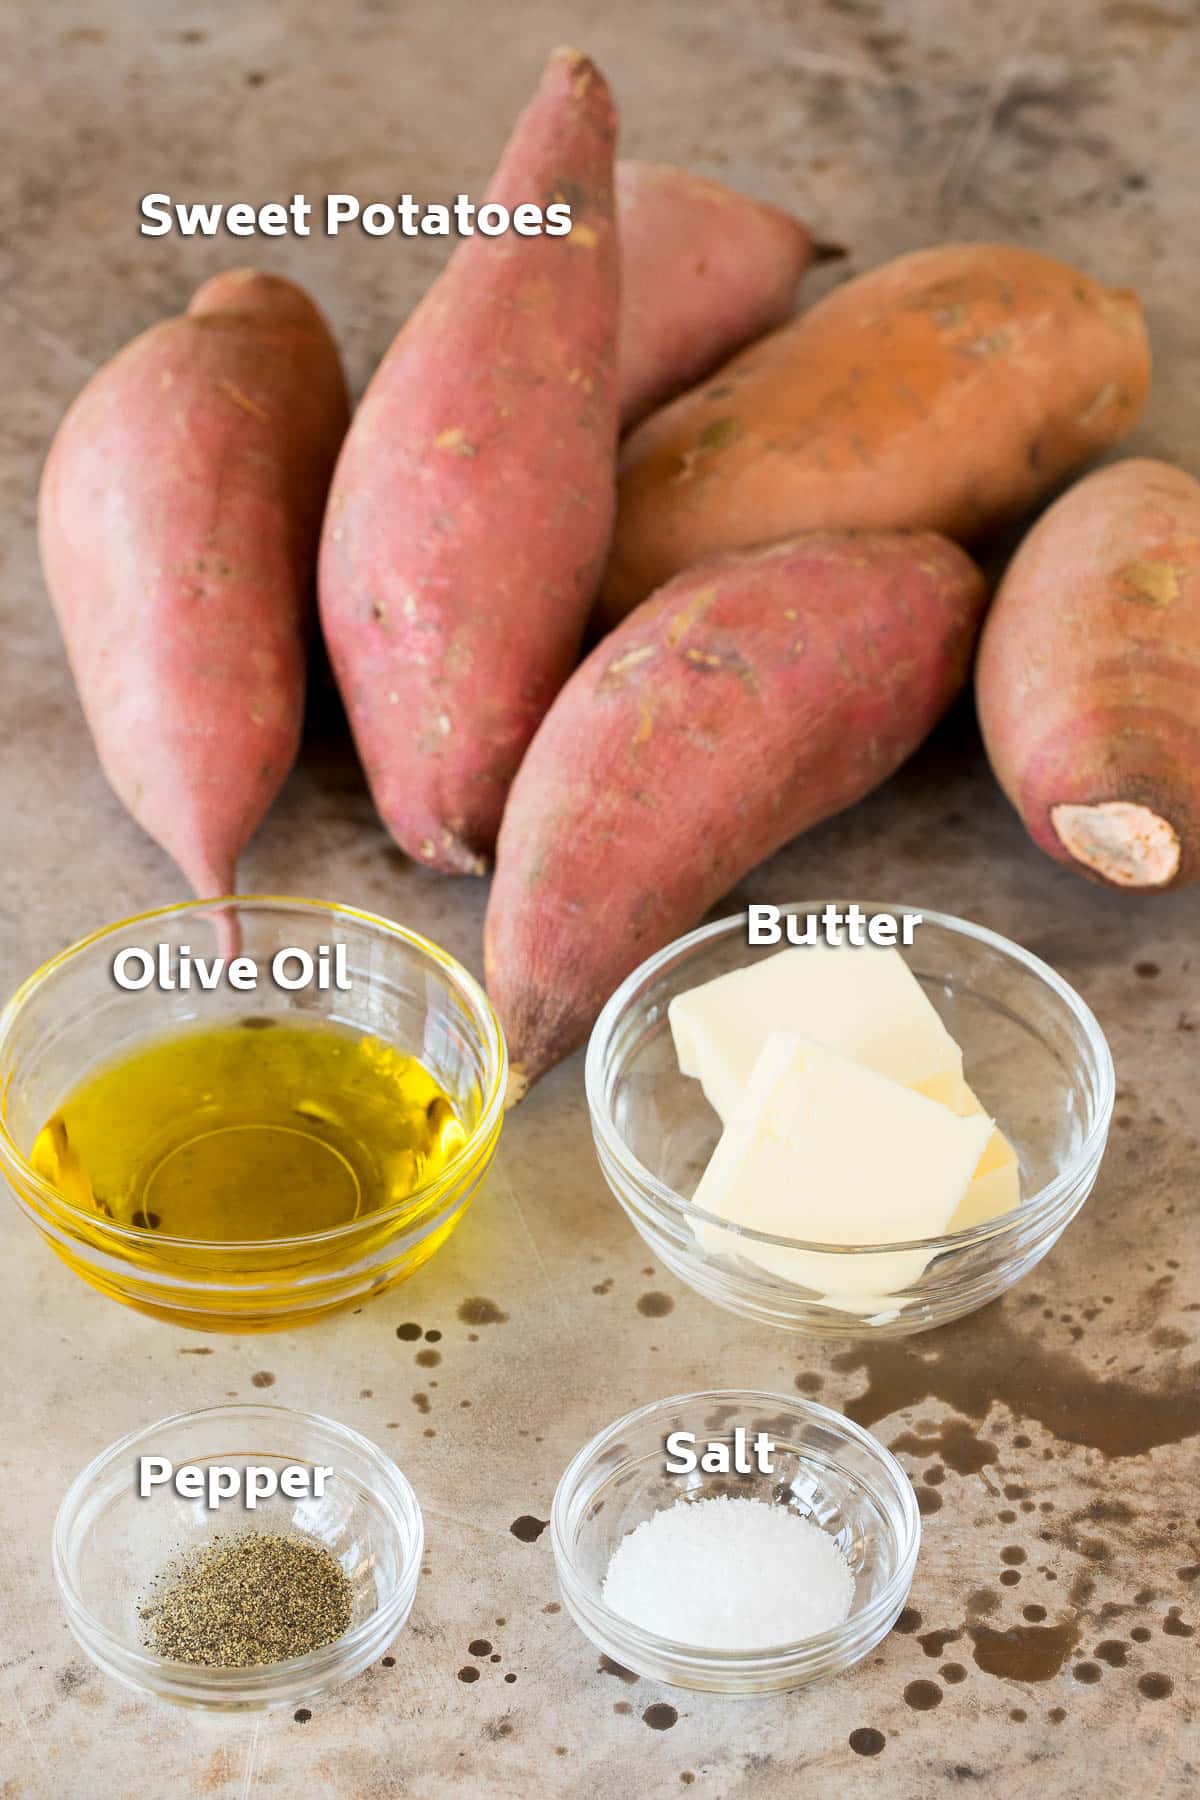 Ingredients including sweet potatoes, butter, olive oil, salt and pepper.